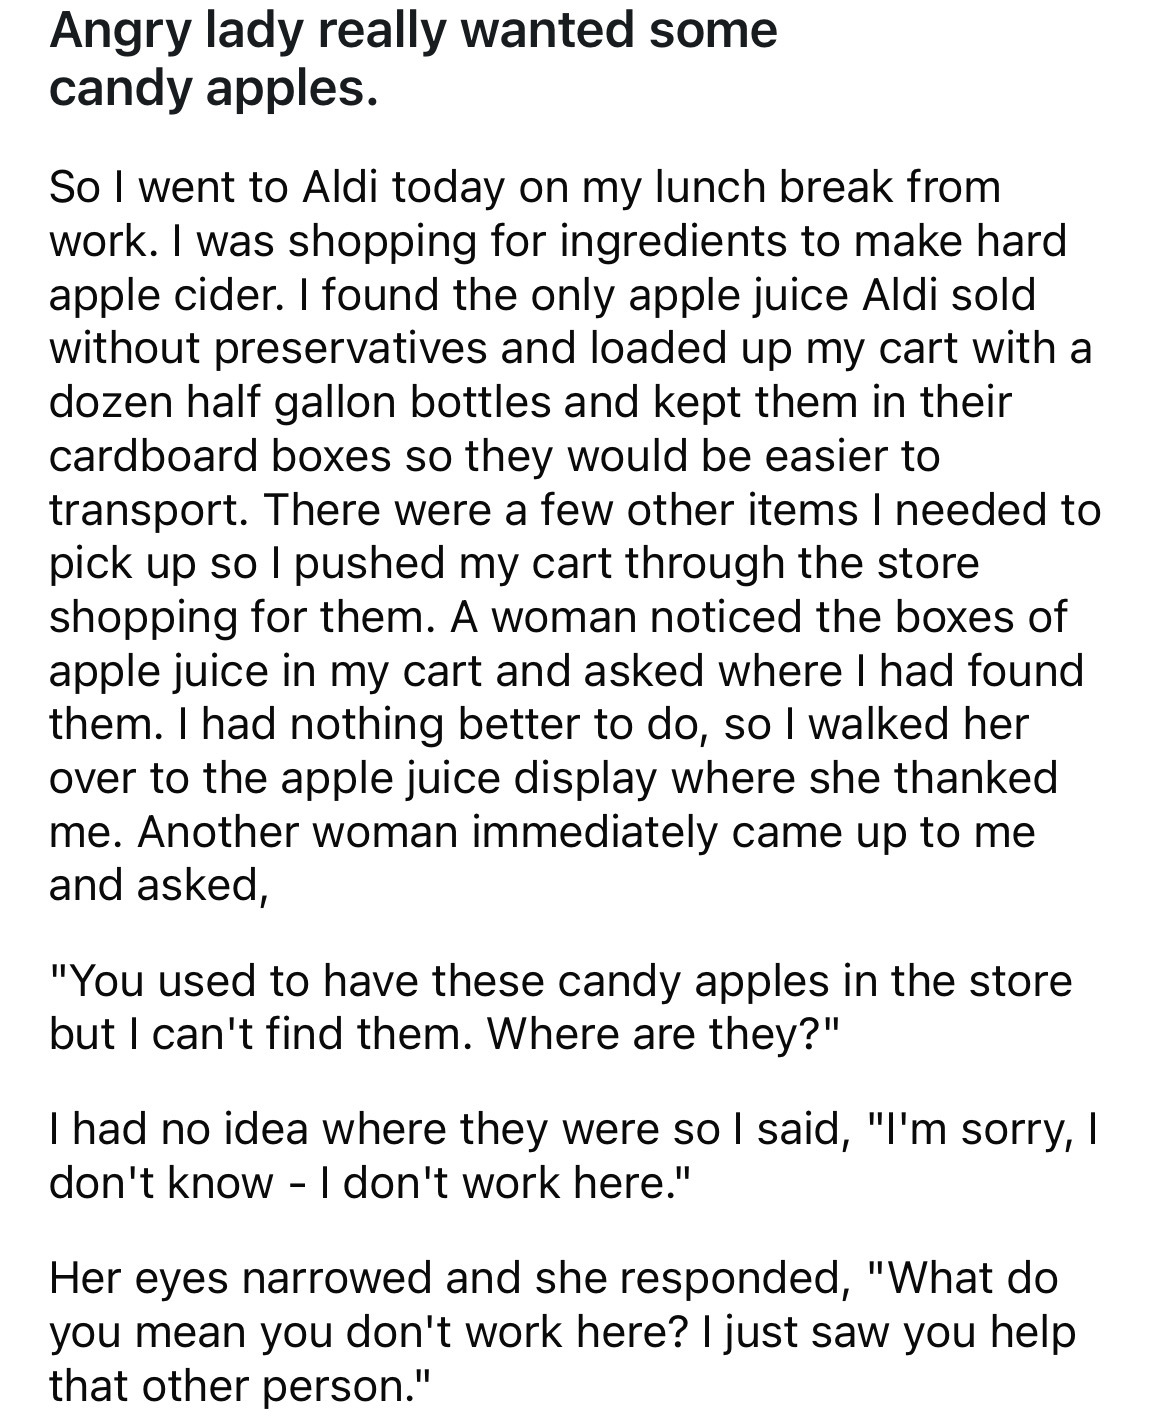 document - Angry lady really wanted some candy apples. So I went to Aldi today on my lunch break from work. I was shopping for ingredients to make hard apple cider. I found the only apple juice Aldi sold without preservatives and loaded up my cart with a 